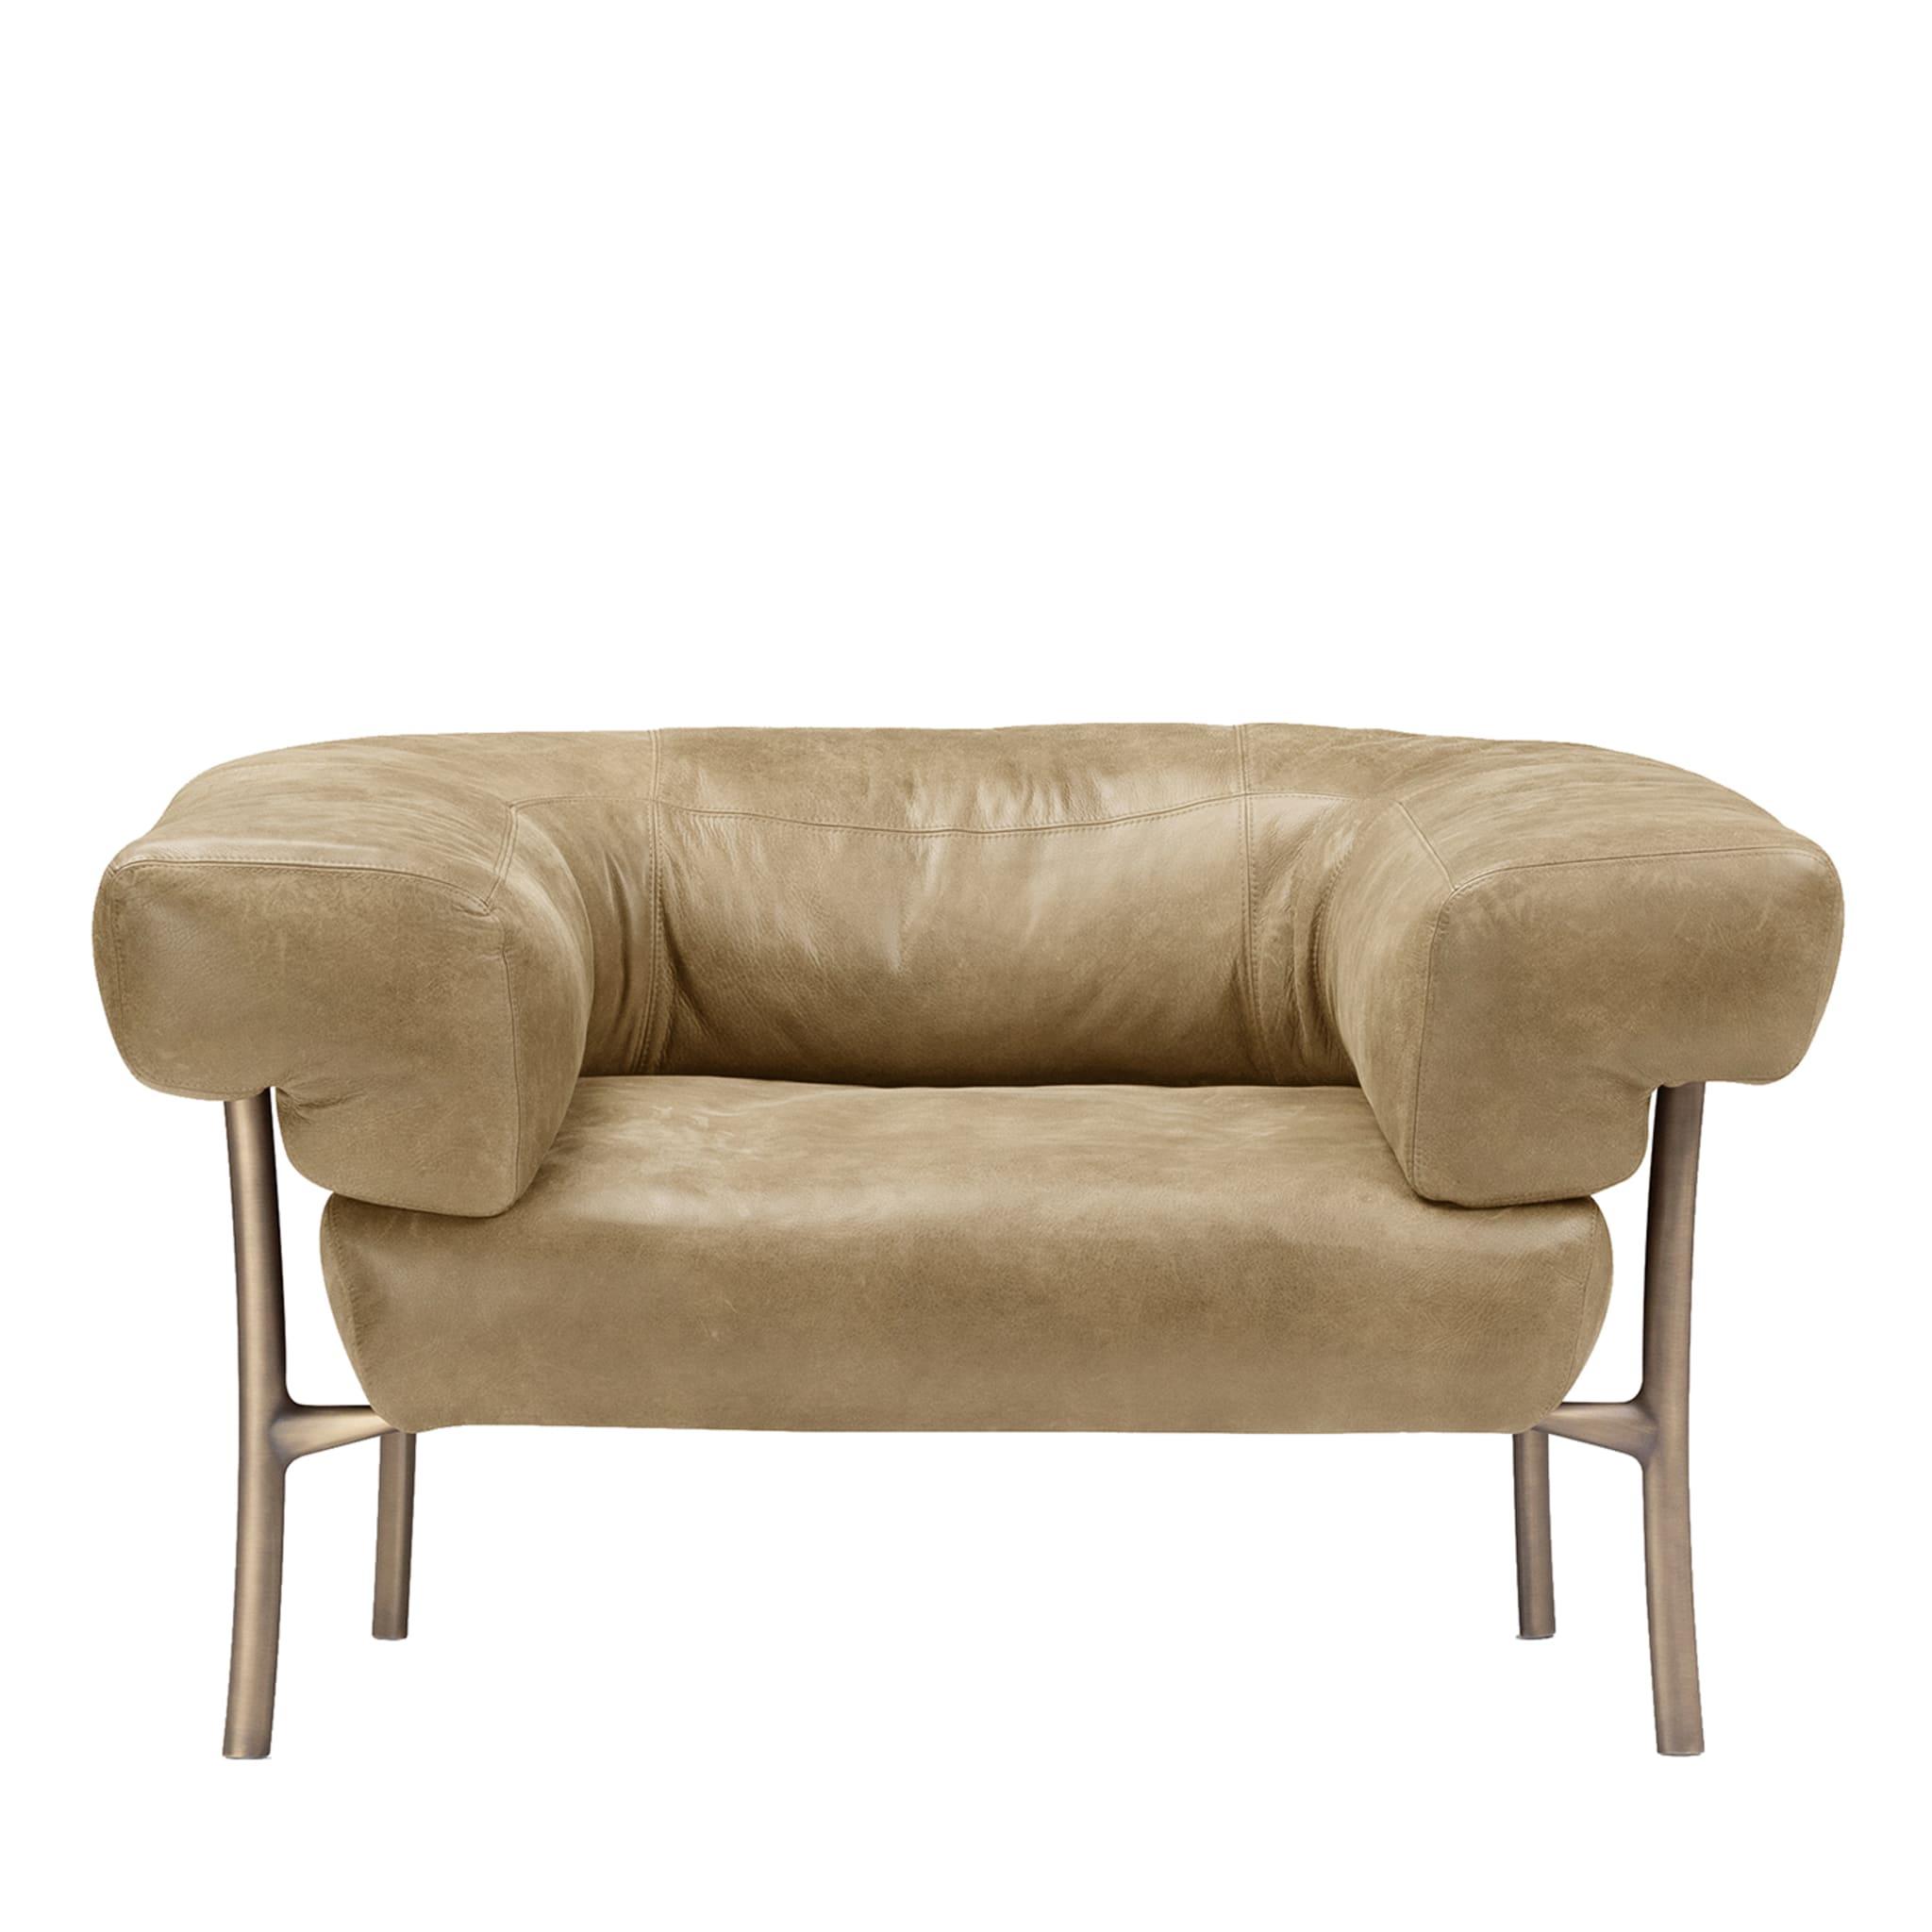 Katana Beige Leather Armchair by Paolo Rizzatto - Main view